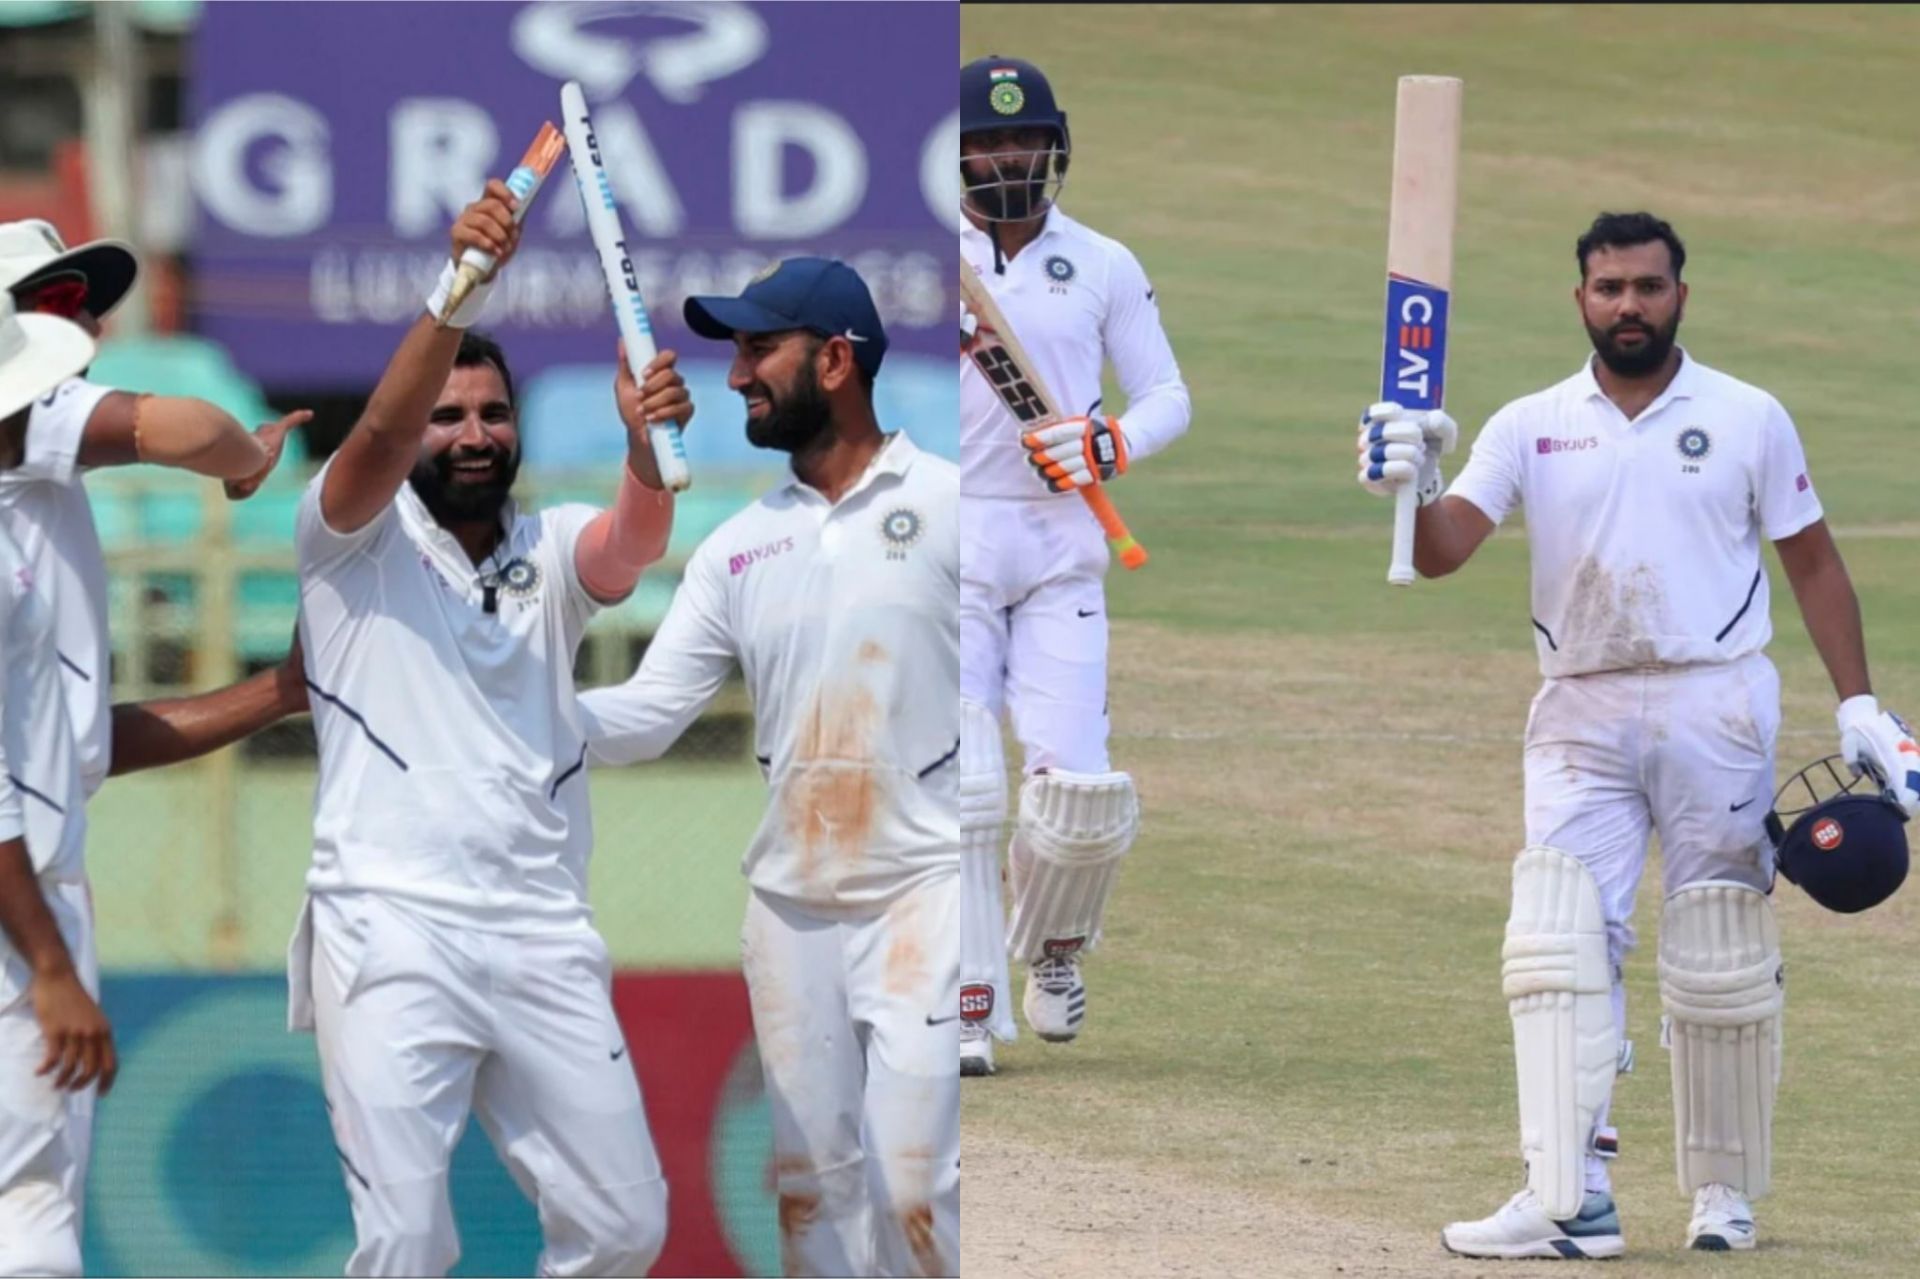 India played their last Test at Vizag in 2019